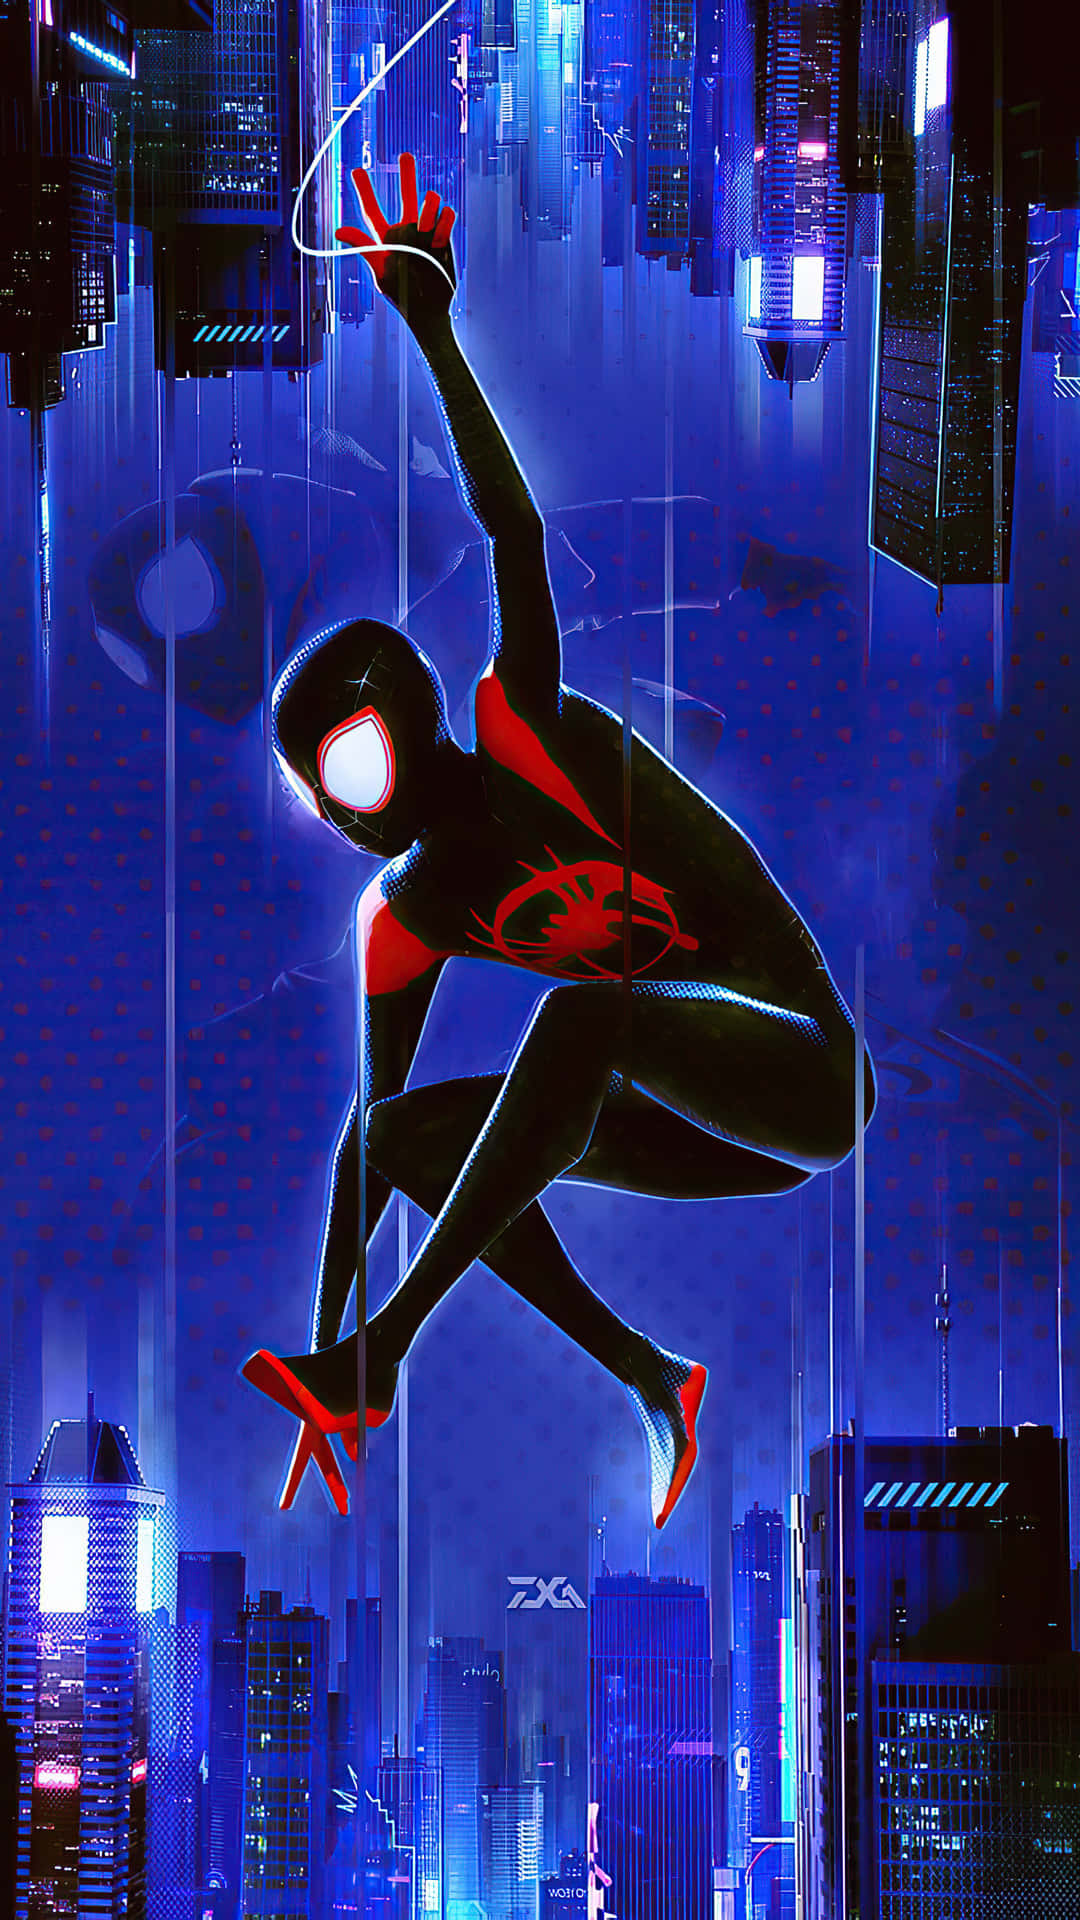 Image  Miles Morales showcasing his superpower abilities